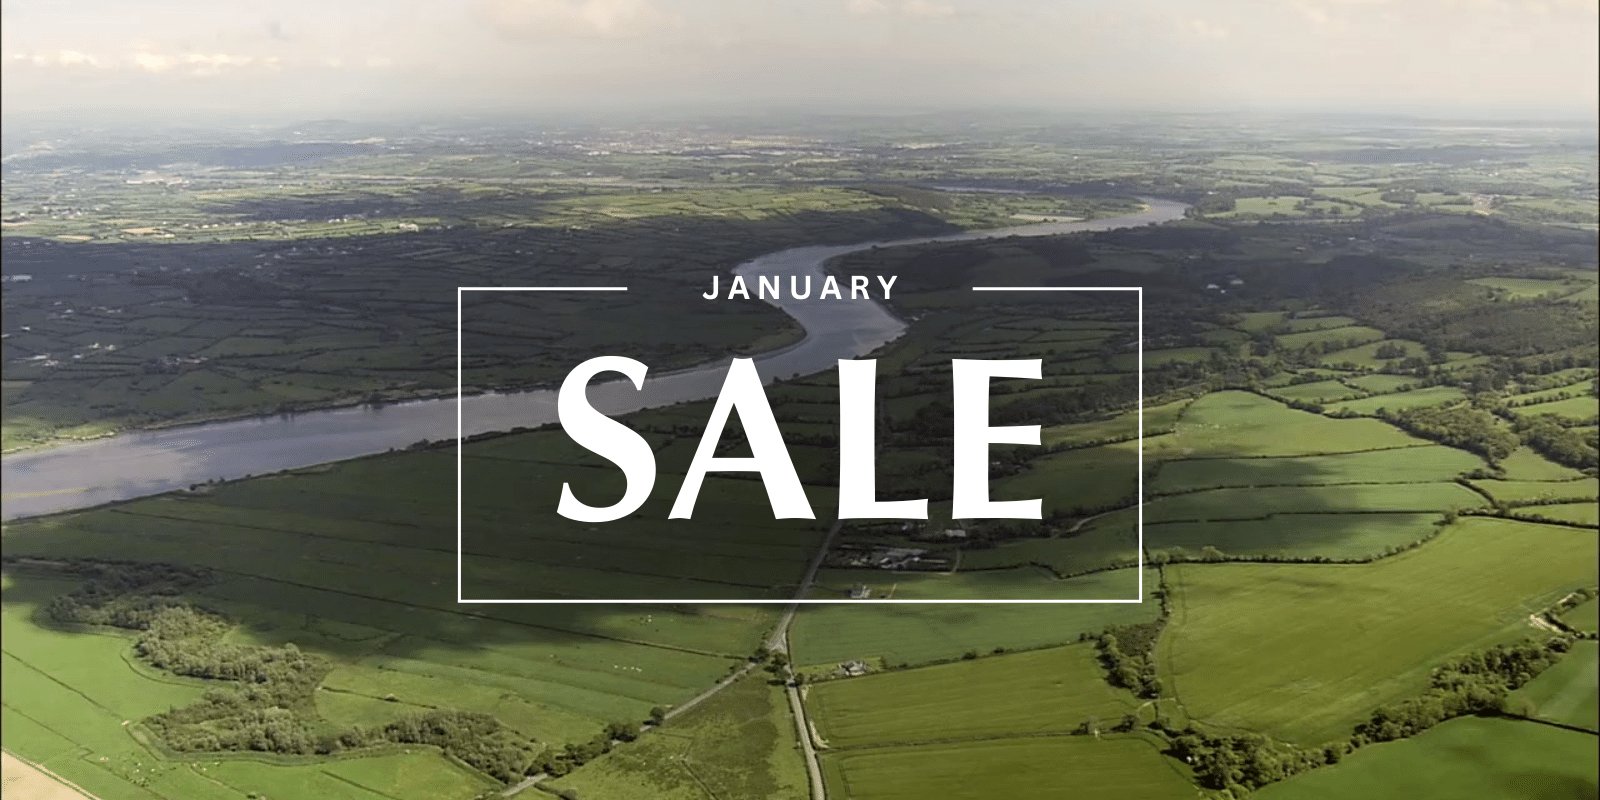 Teaser january sale loyalty page banner image x www.towerhotelwaterford.com_v4